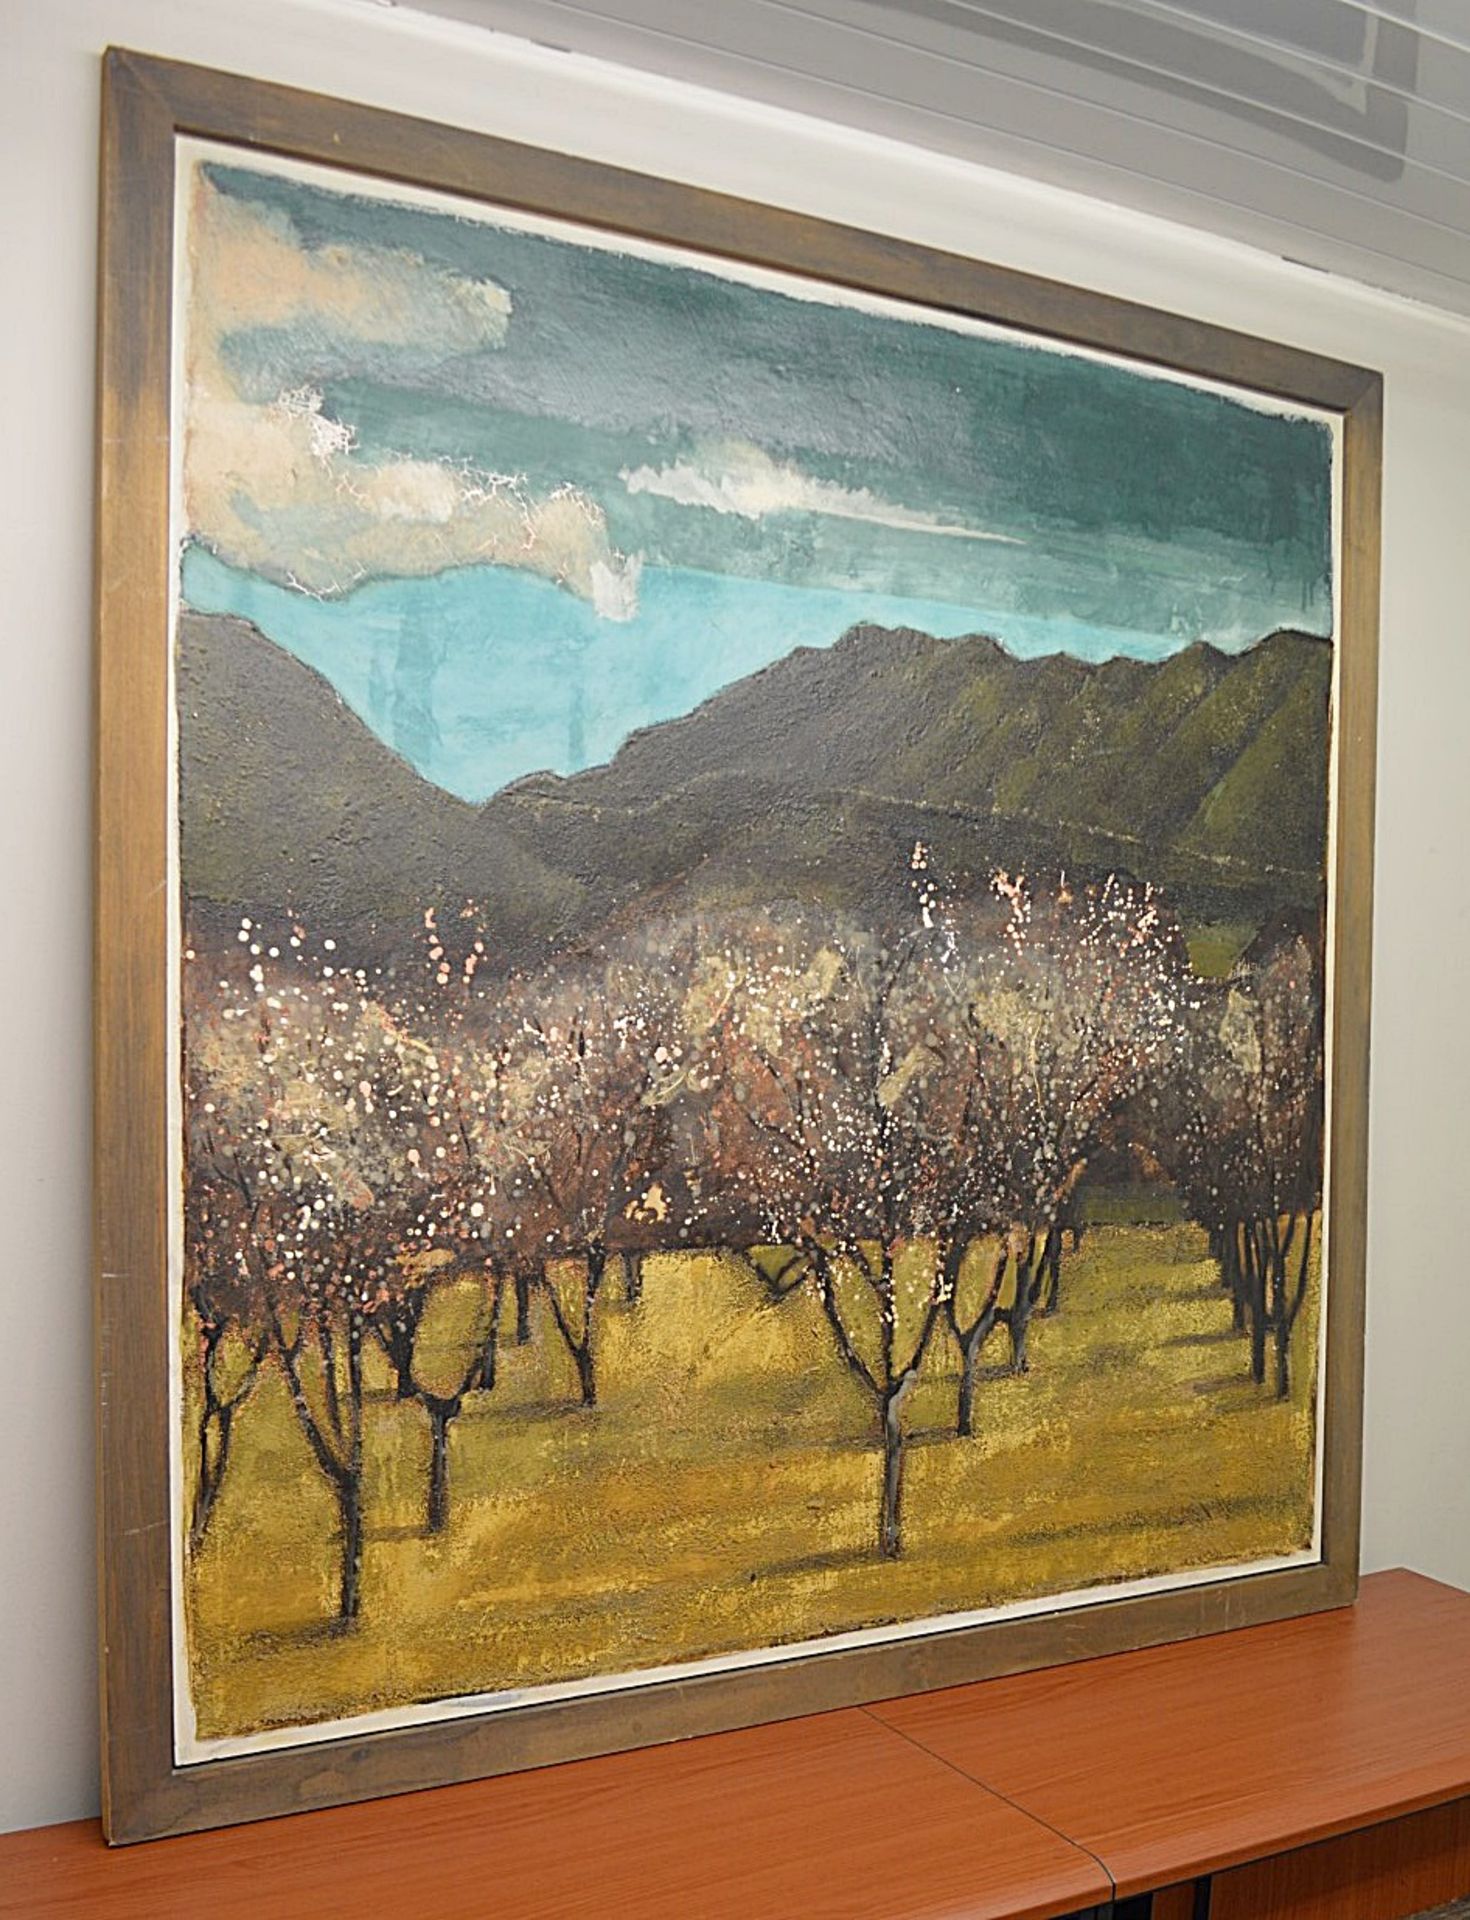 1 x Original Signed Framed Painting Of A Spanish Orchard By Lydia Bauman (1997) - Dimensions: 122 - Image 4 of 8